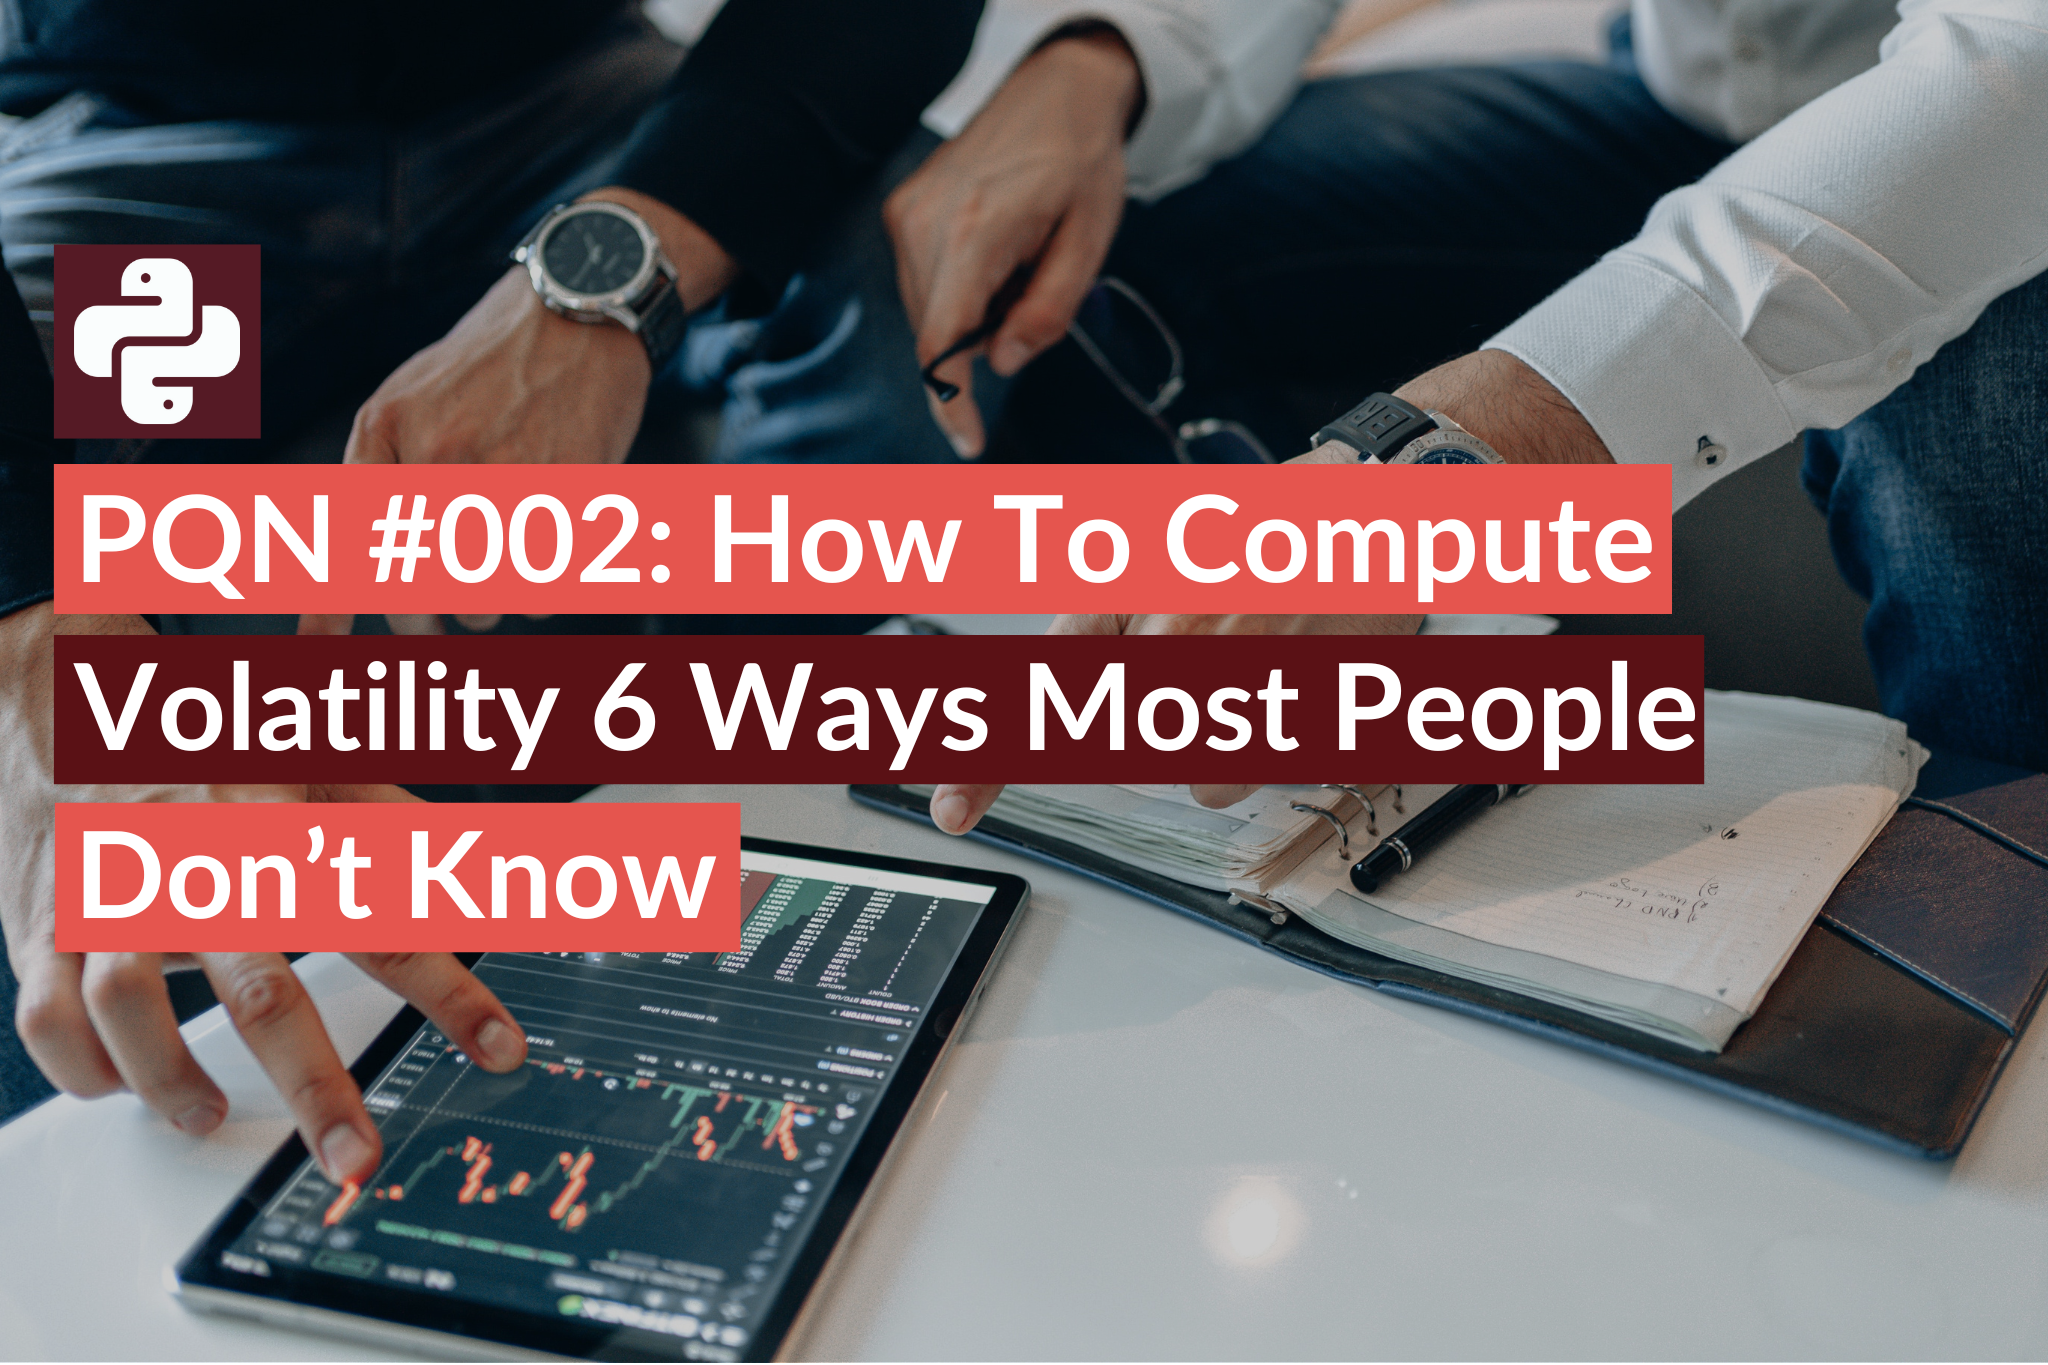 PQN #002: How To Compute Volatility 6 Ways Most People Don’t Know